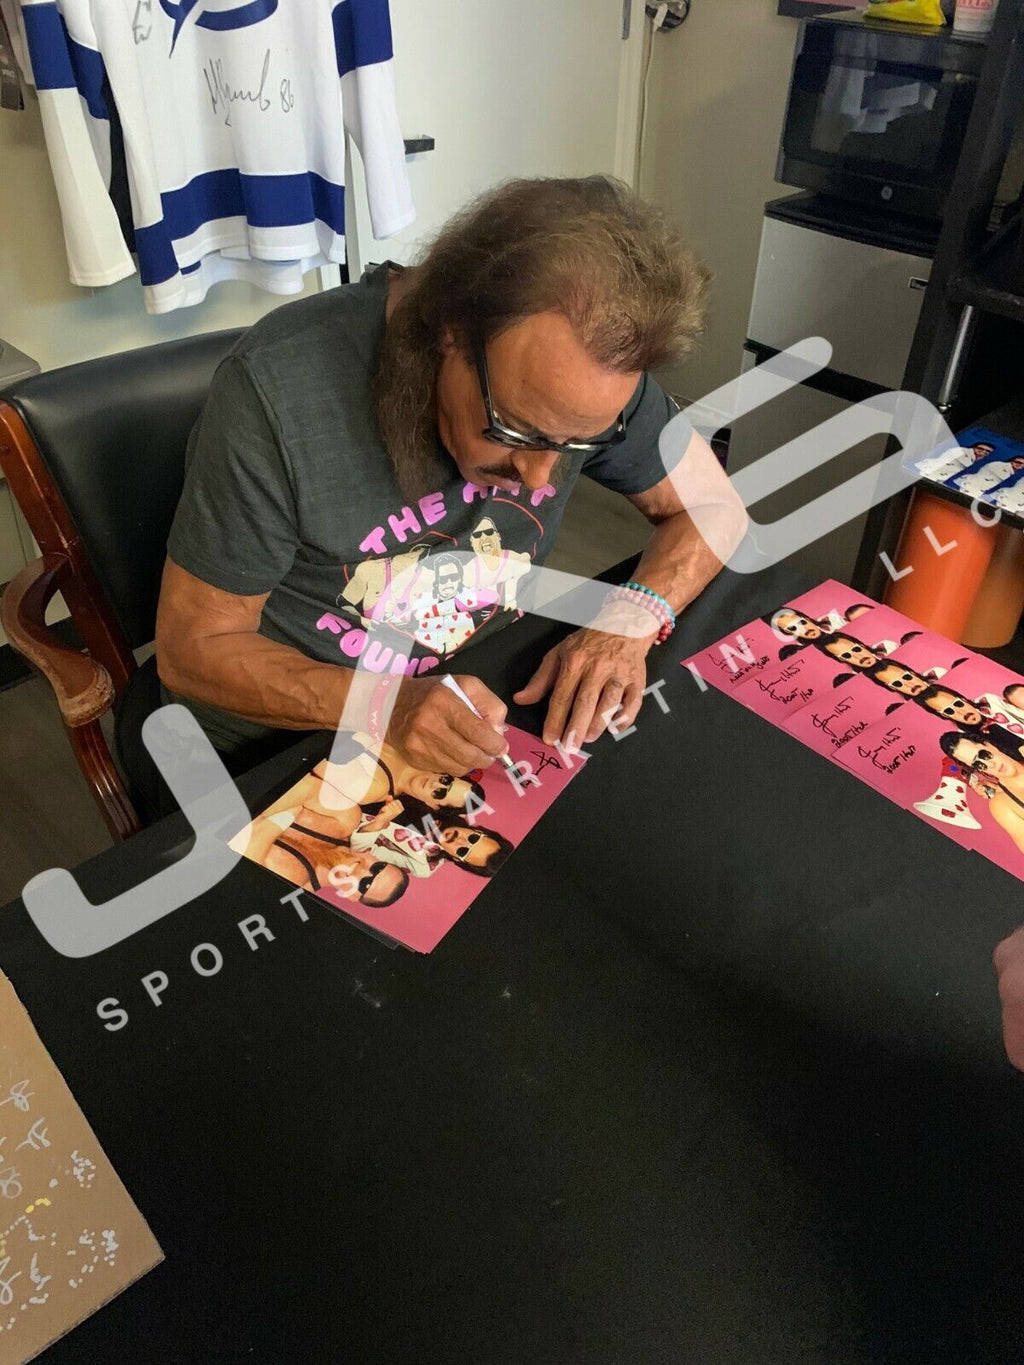 Jimmy Hart autographed signed inscribed 8x10 photo WWE PSA Mouth of the South